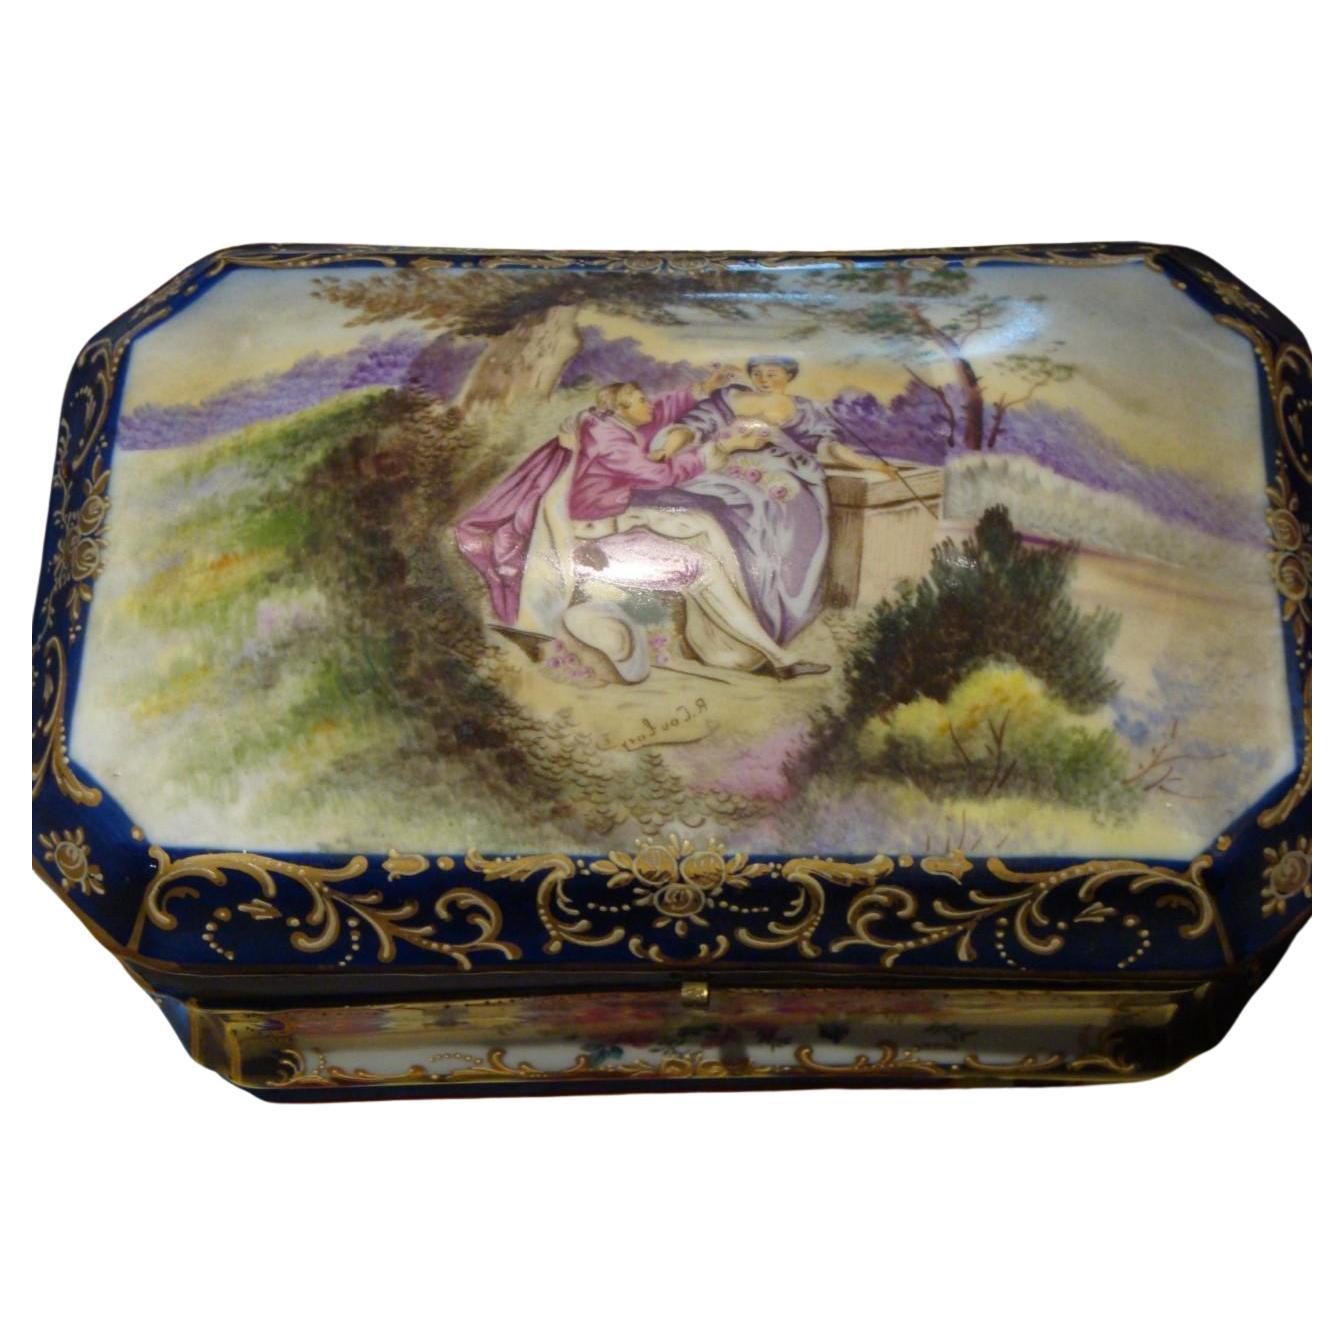 Rare Important Gorgeous Dresden Style Sevres Style Porcelain Jewelry Box Casket For Sale